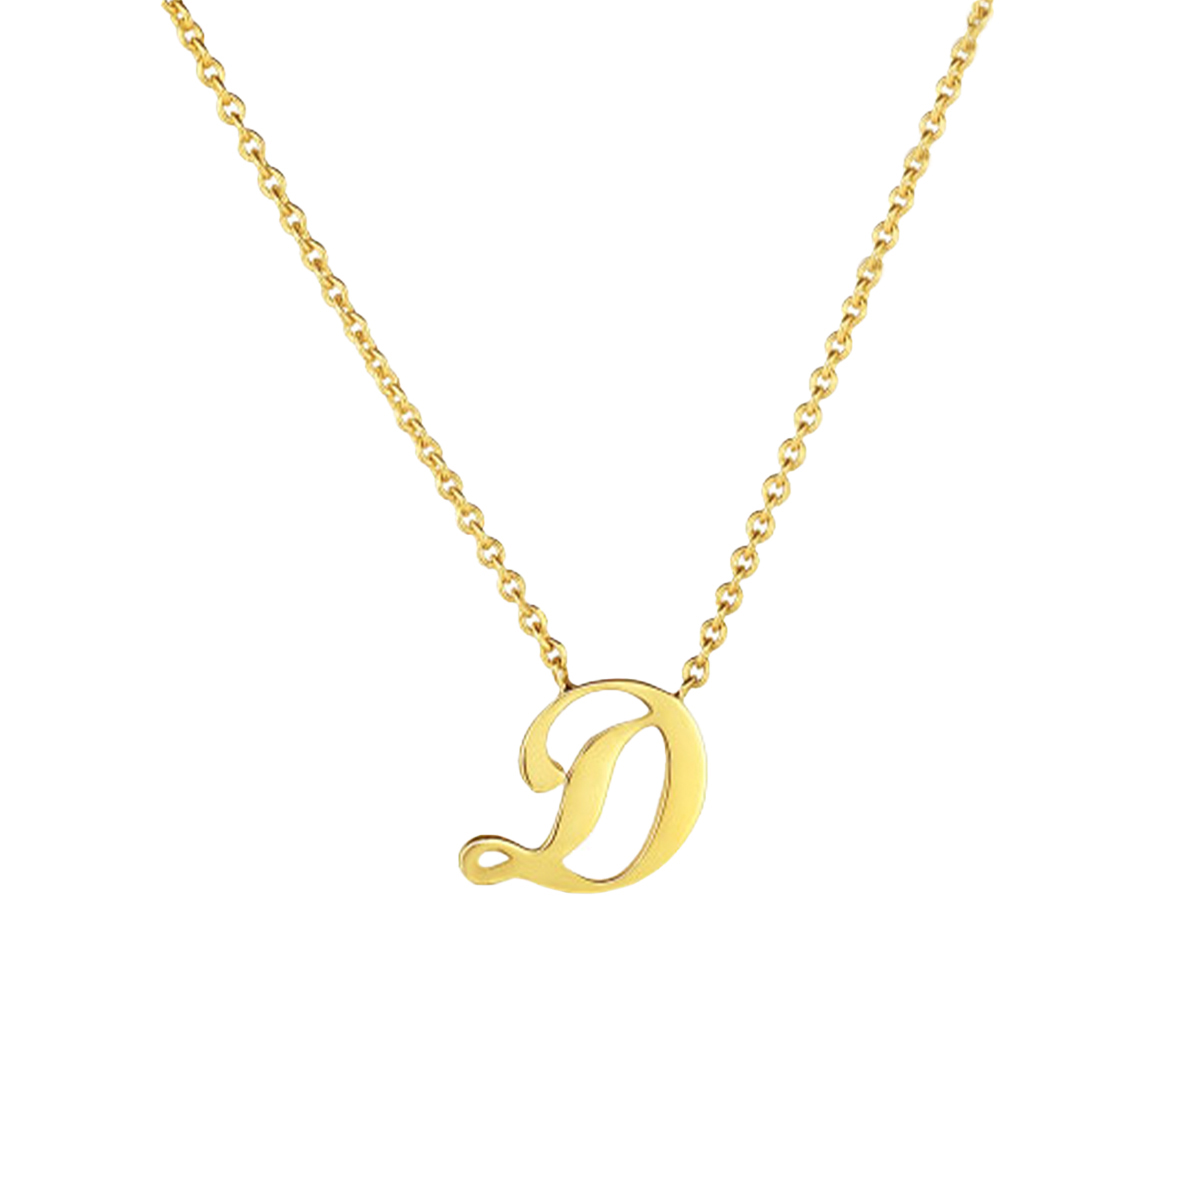 18K Yellow Gold Small Script "D" Pendant with Chain